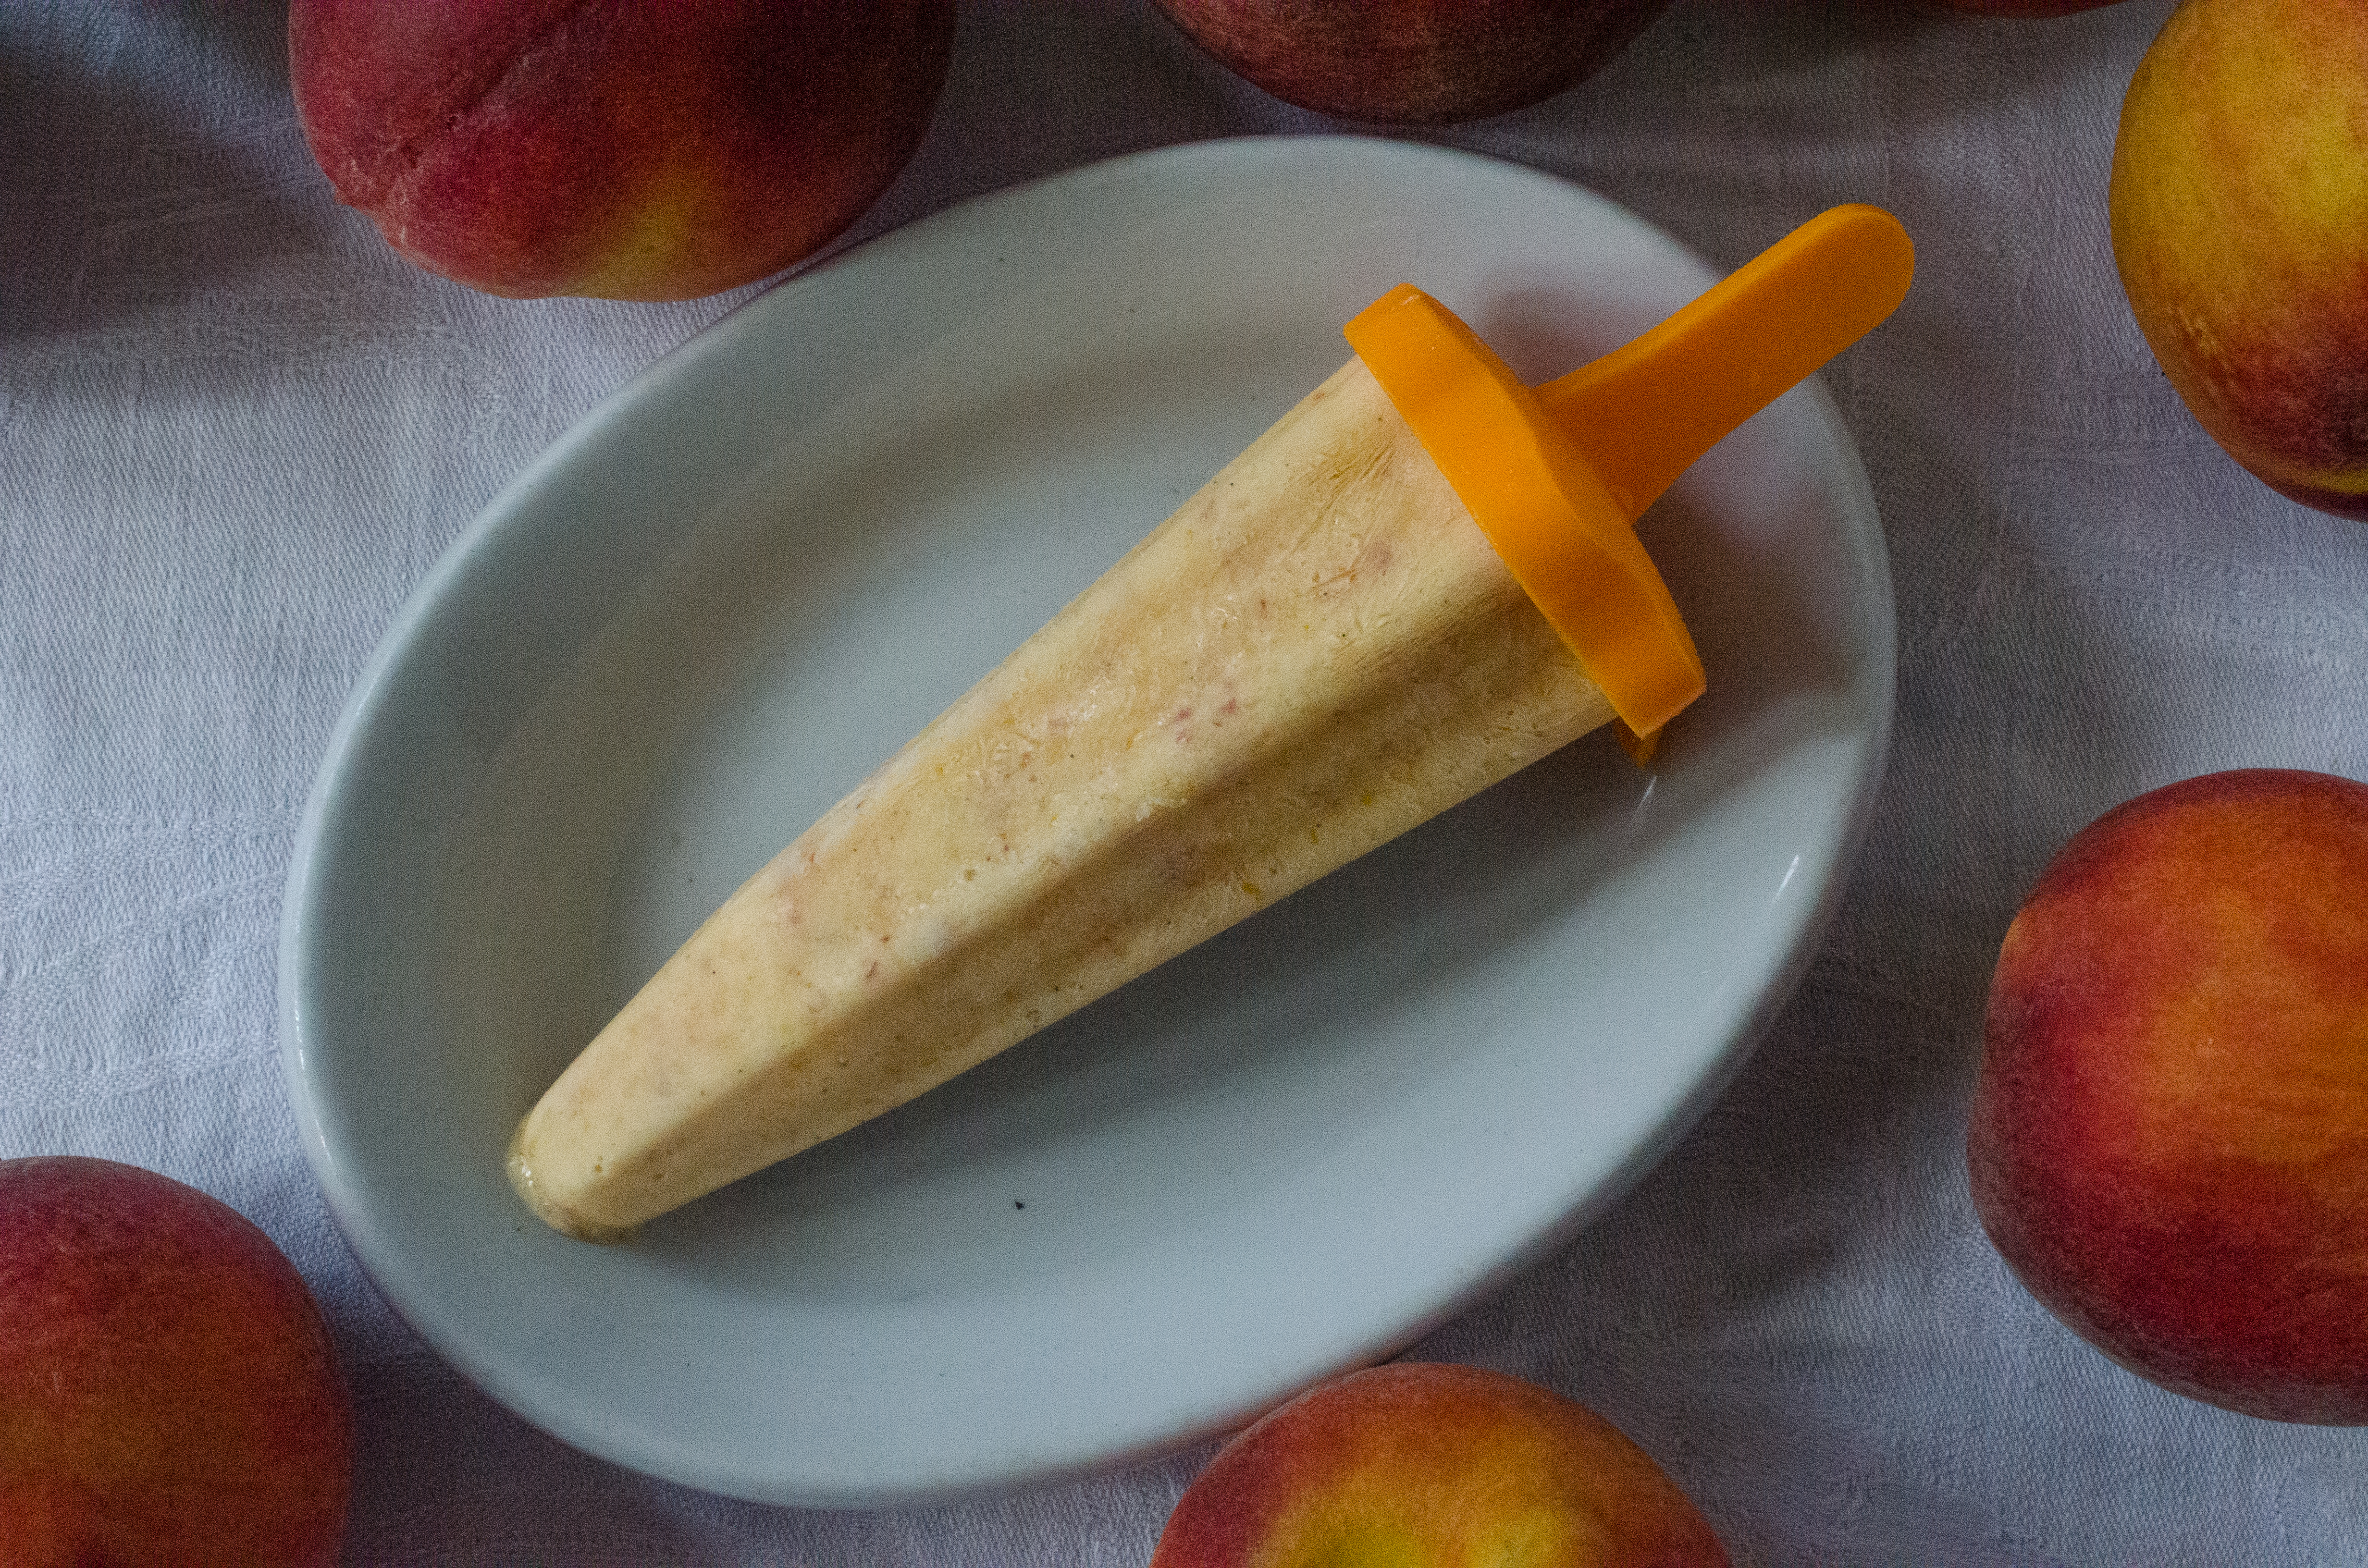 Enjoy a homemade frozen treat with Dreamy Peach Ice Pops. (Virginia Willis for The Atlanta Journal-Constitution)